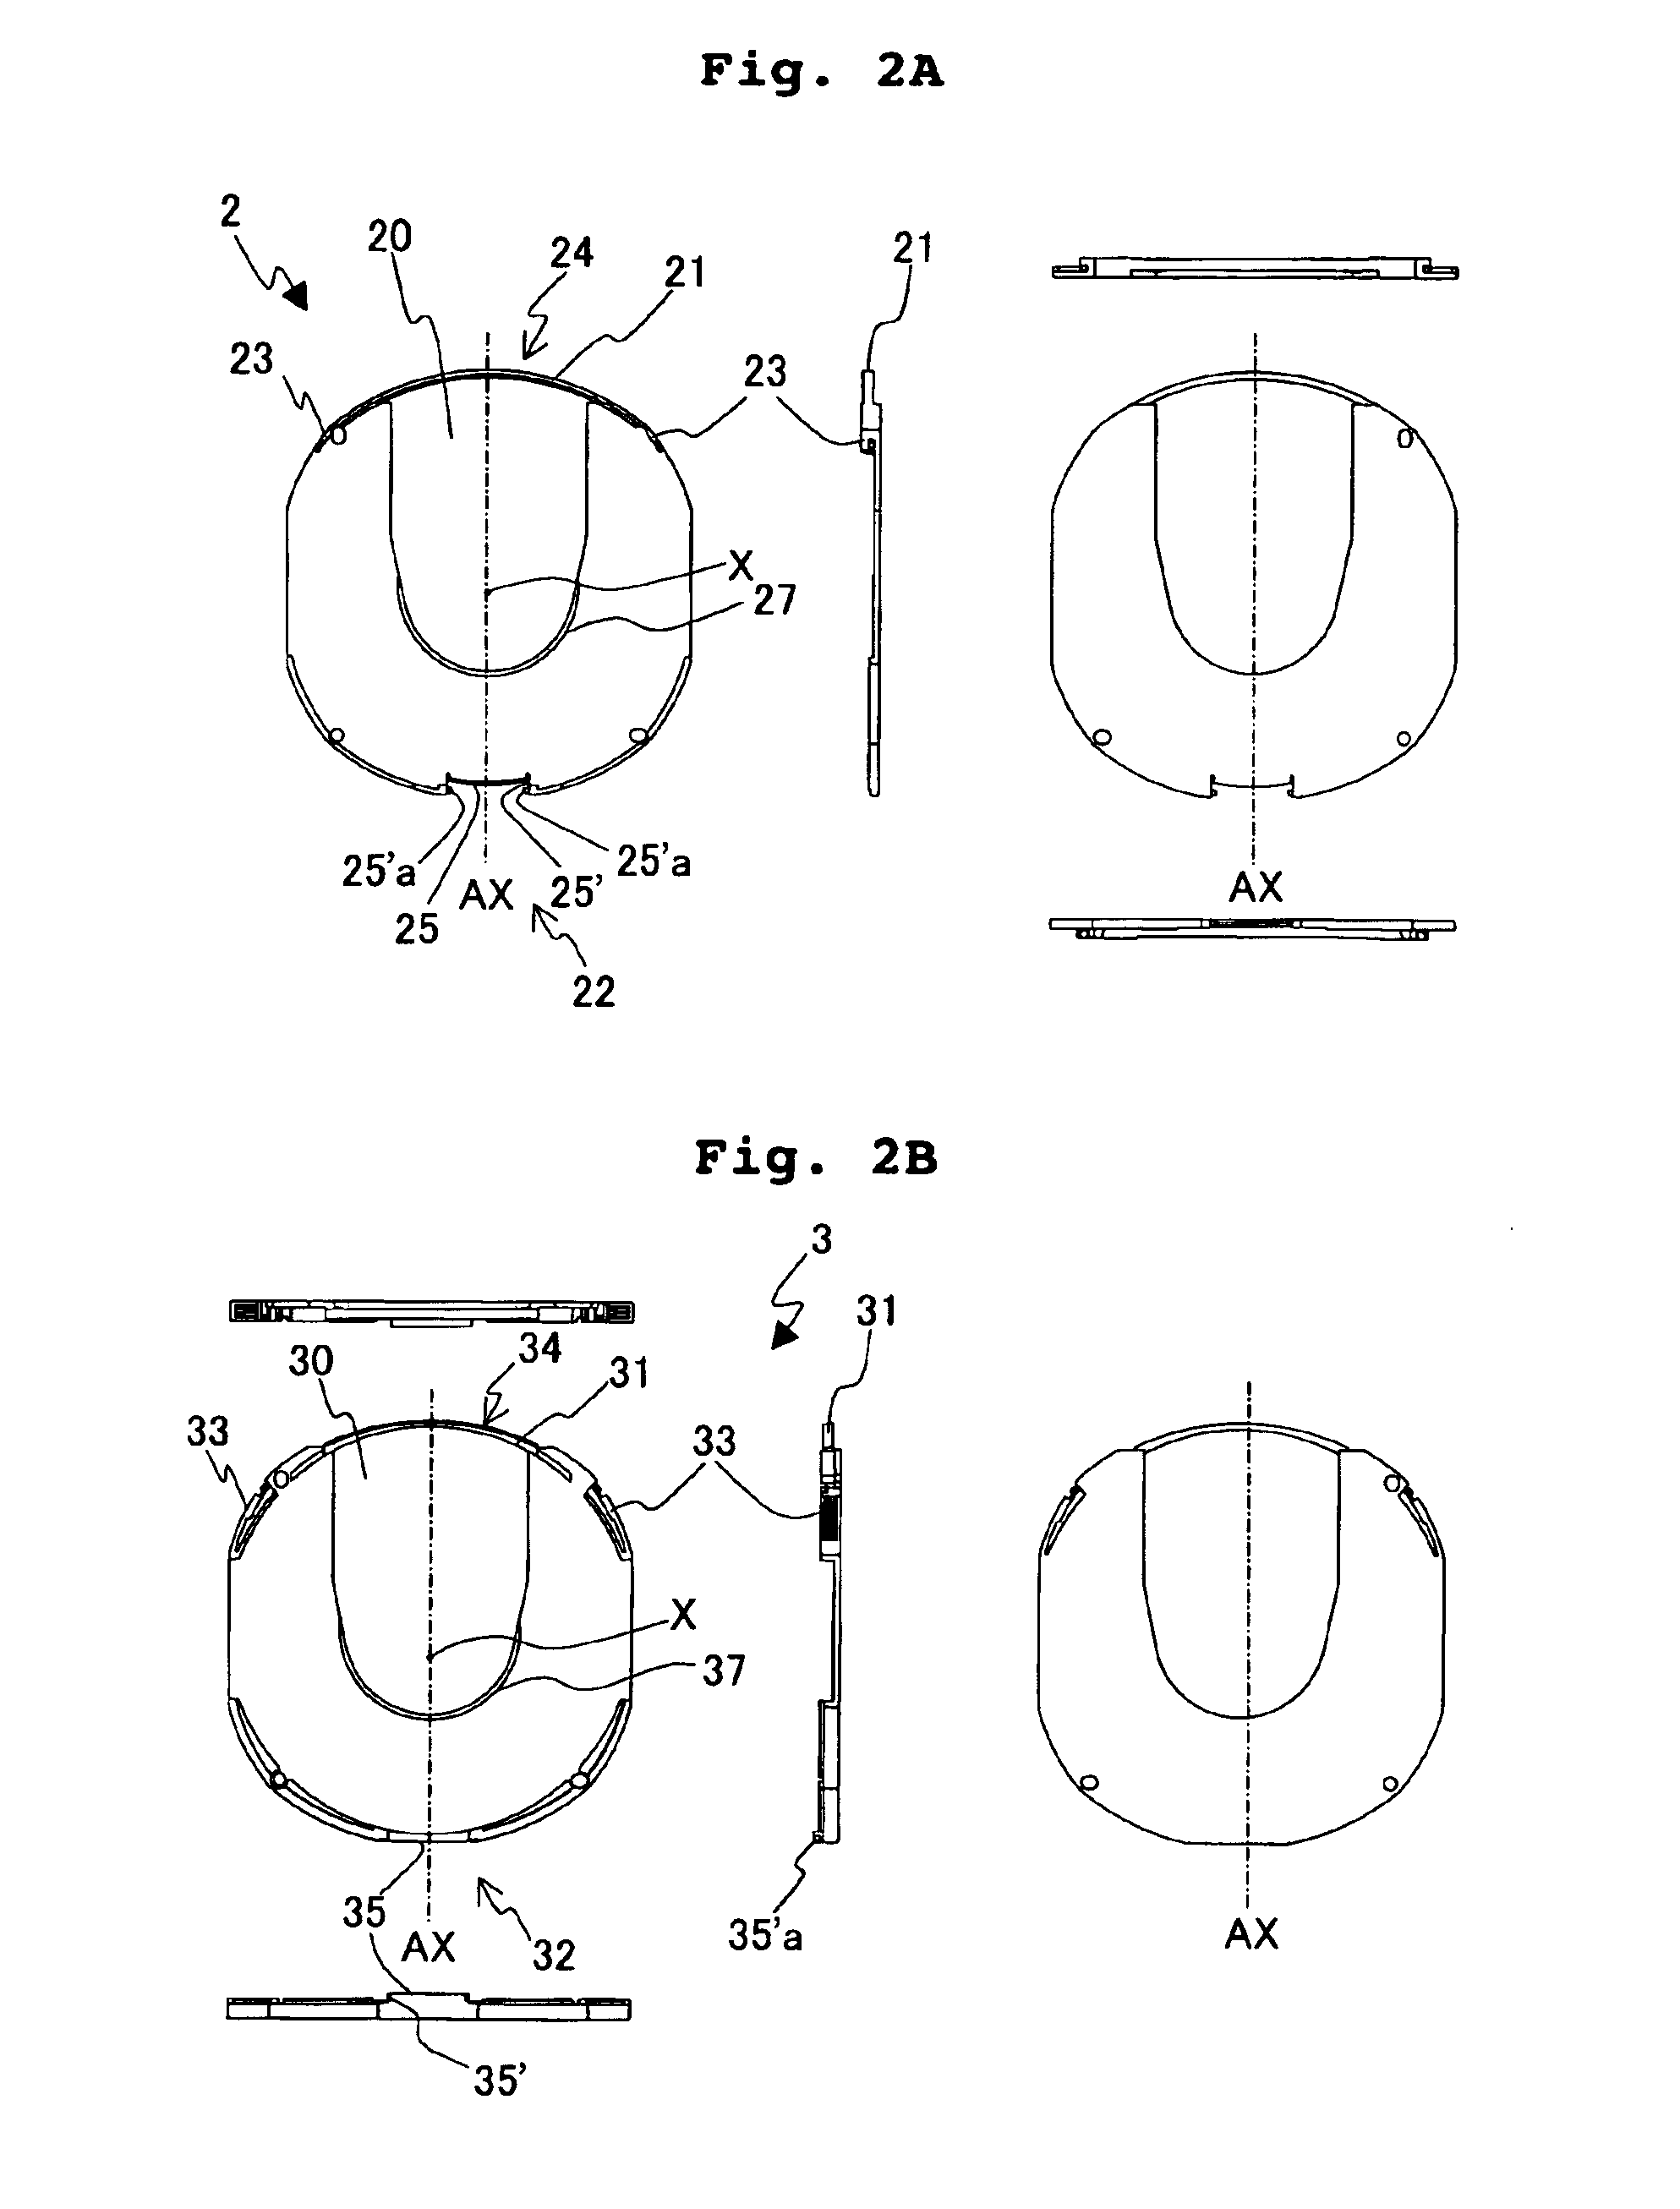 Disk cartridge which accommodates an information-recording disk